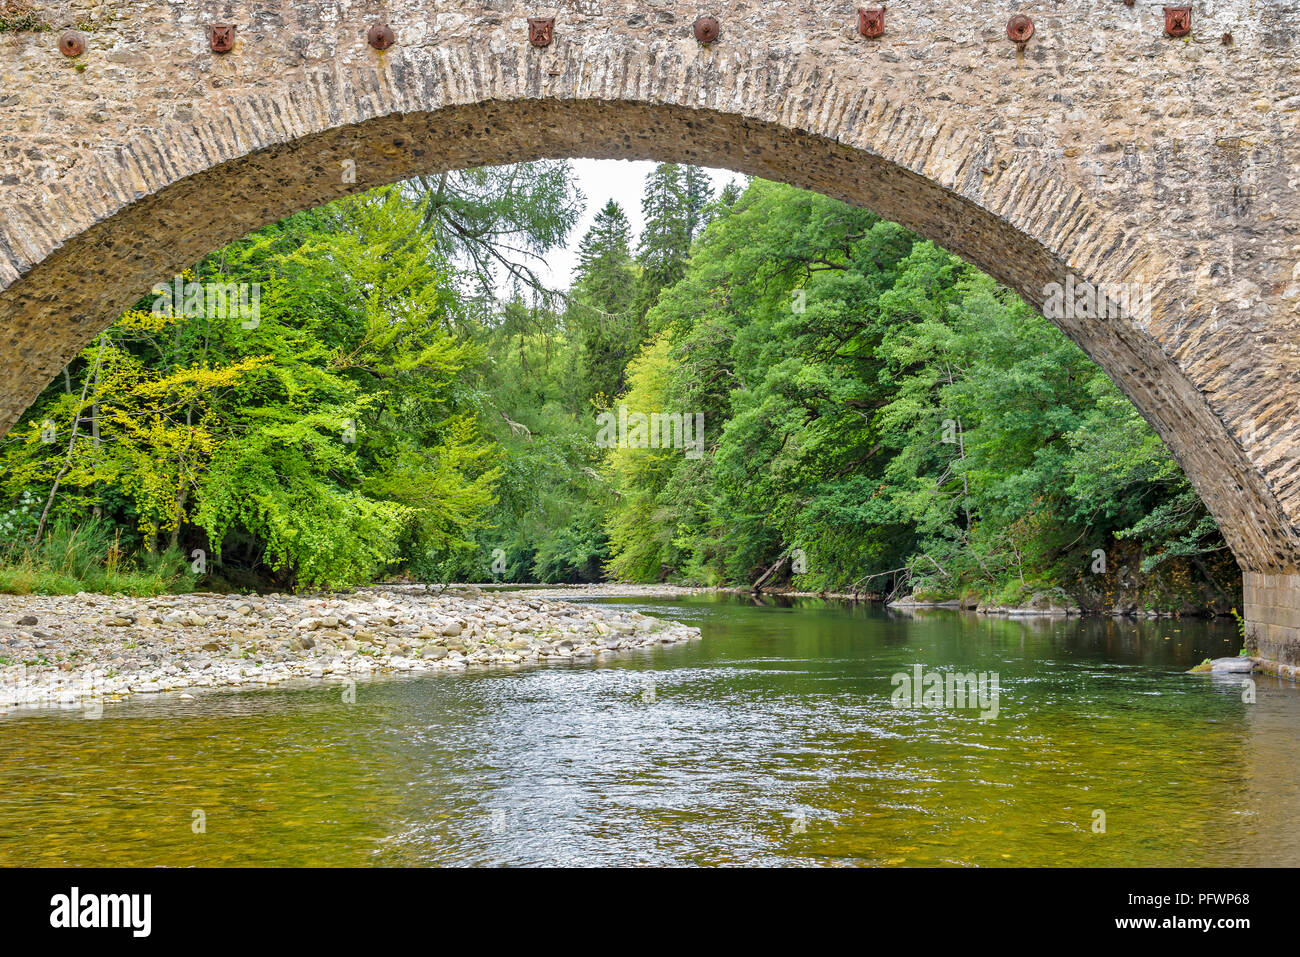 OLD BRIDGE OVER THE RIVER AVON BALLINDALLOCH SPEYSIDE SCOTLAND VIEW OF THE RIVER UNDER AN ARCH Stock Photo